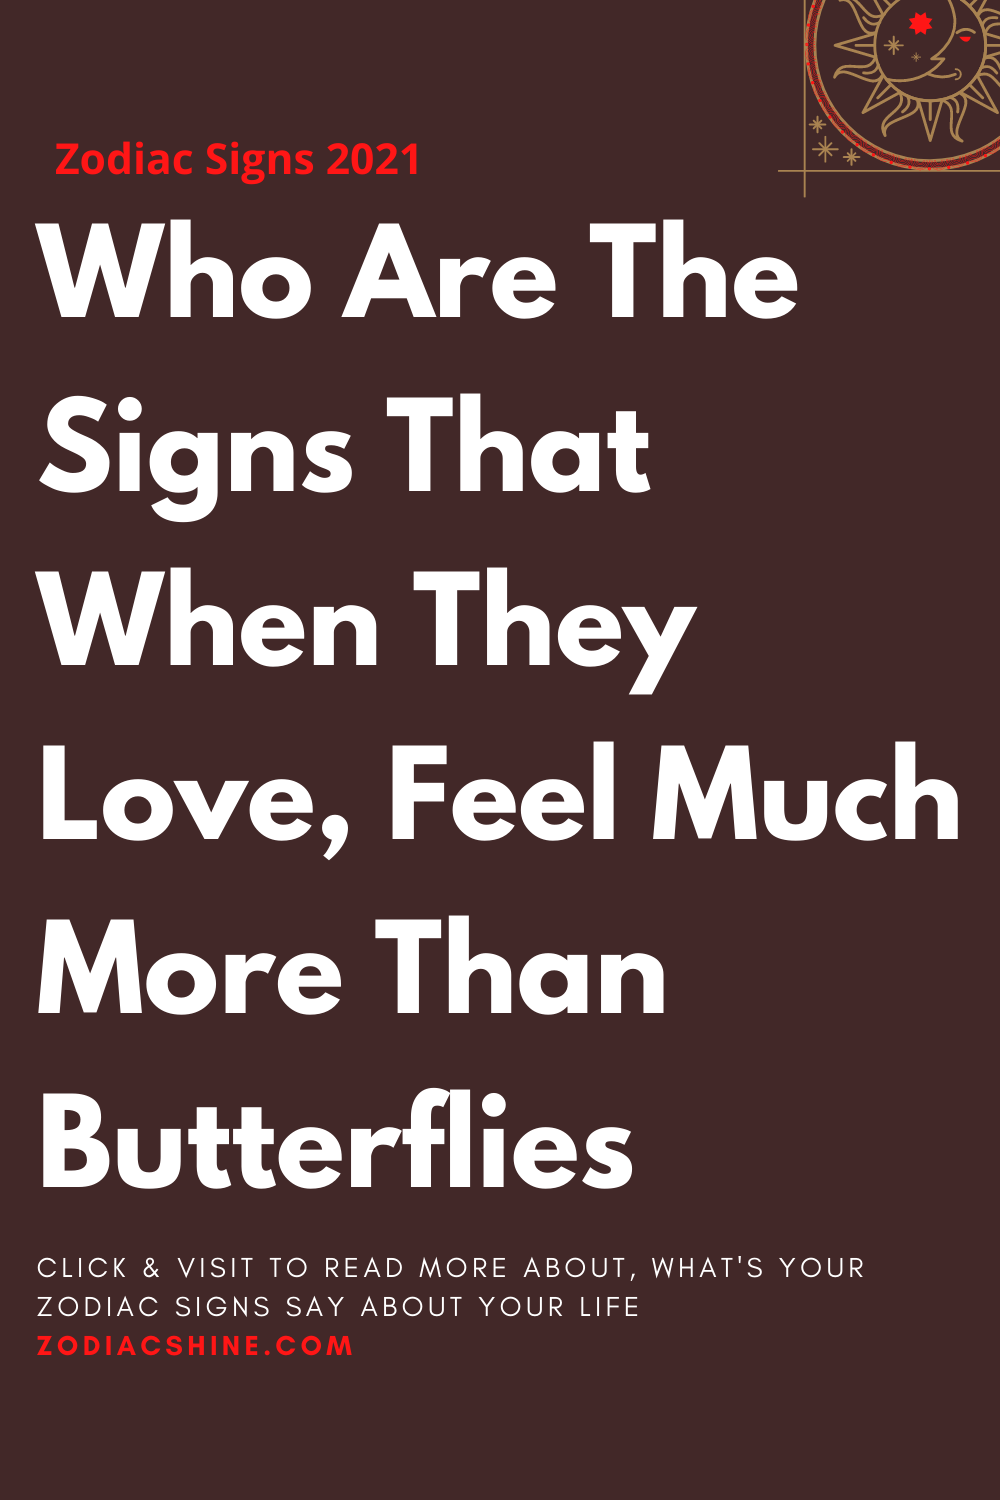 Who Are The Signs That When They Love, Feel Much More Than Butterflies